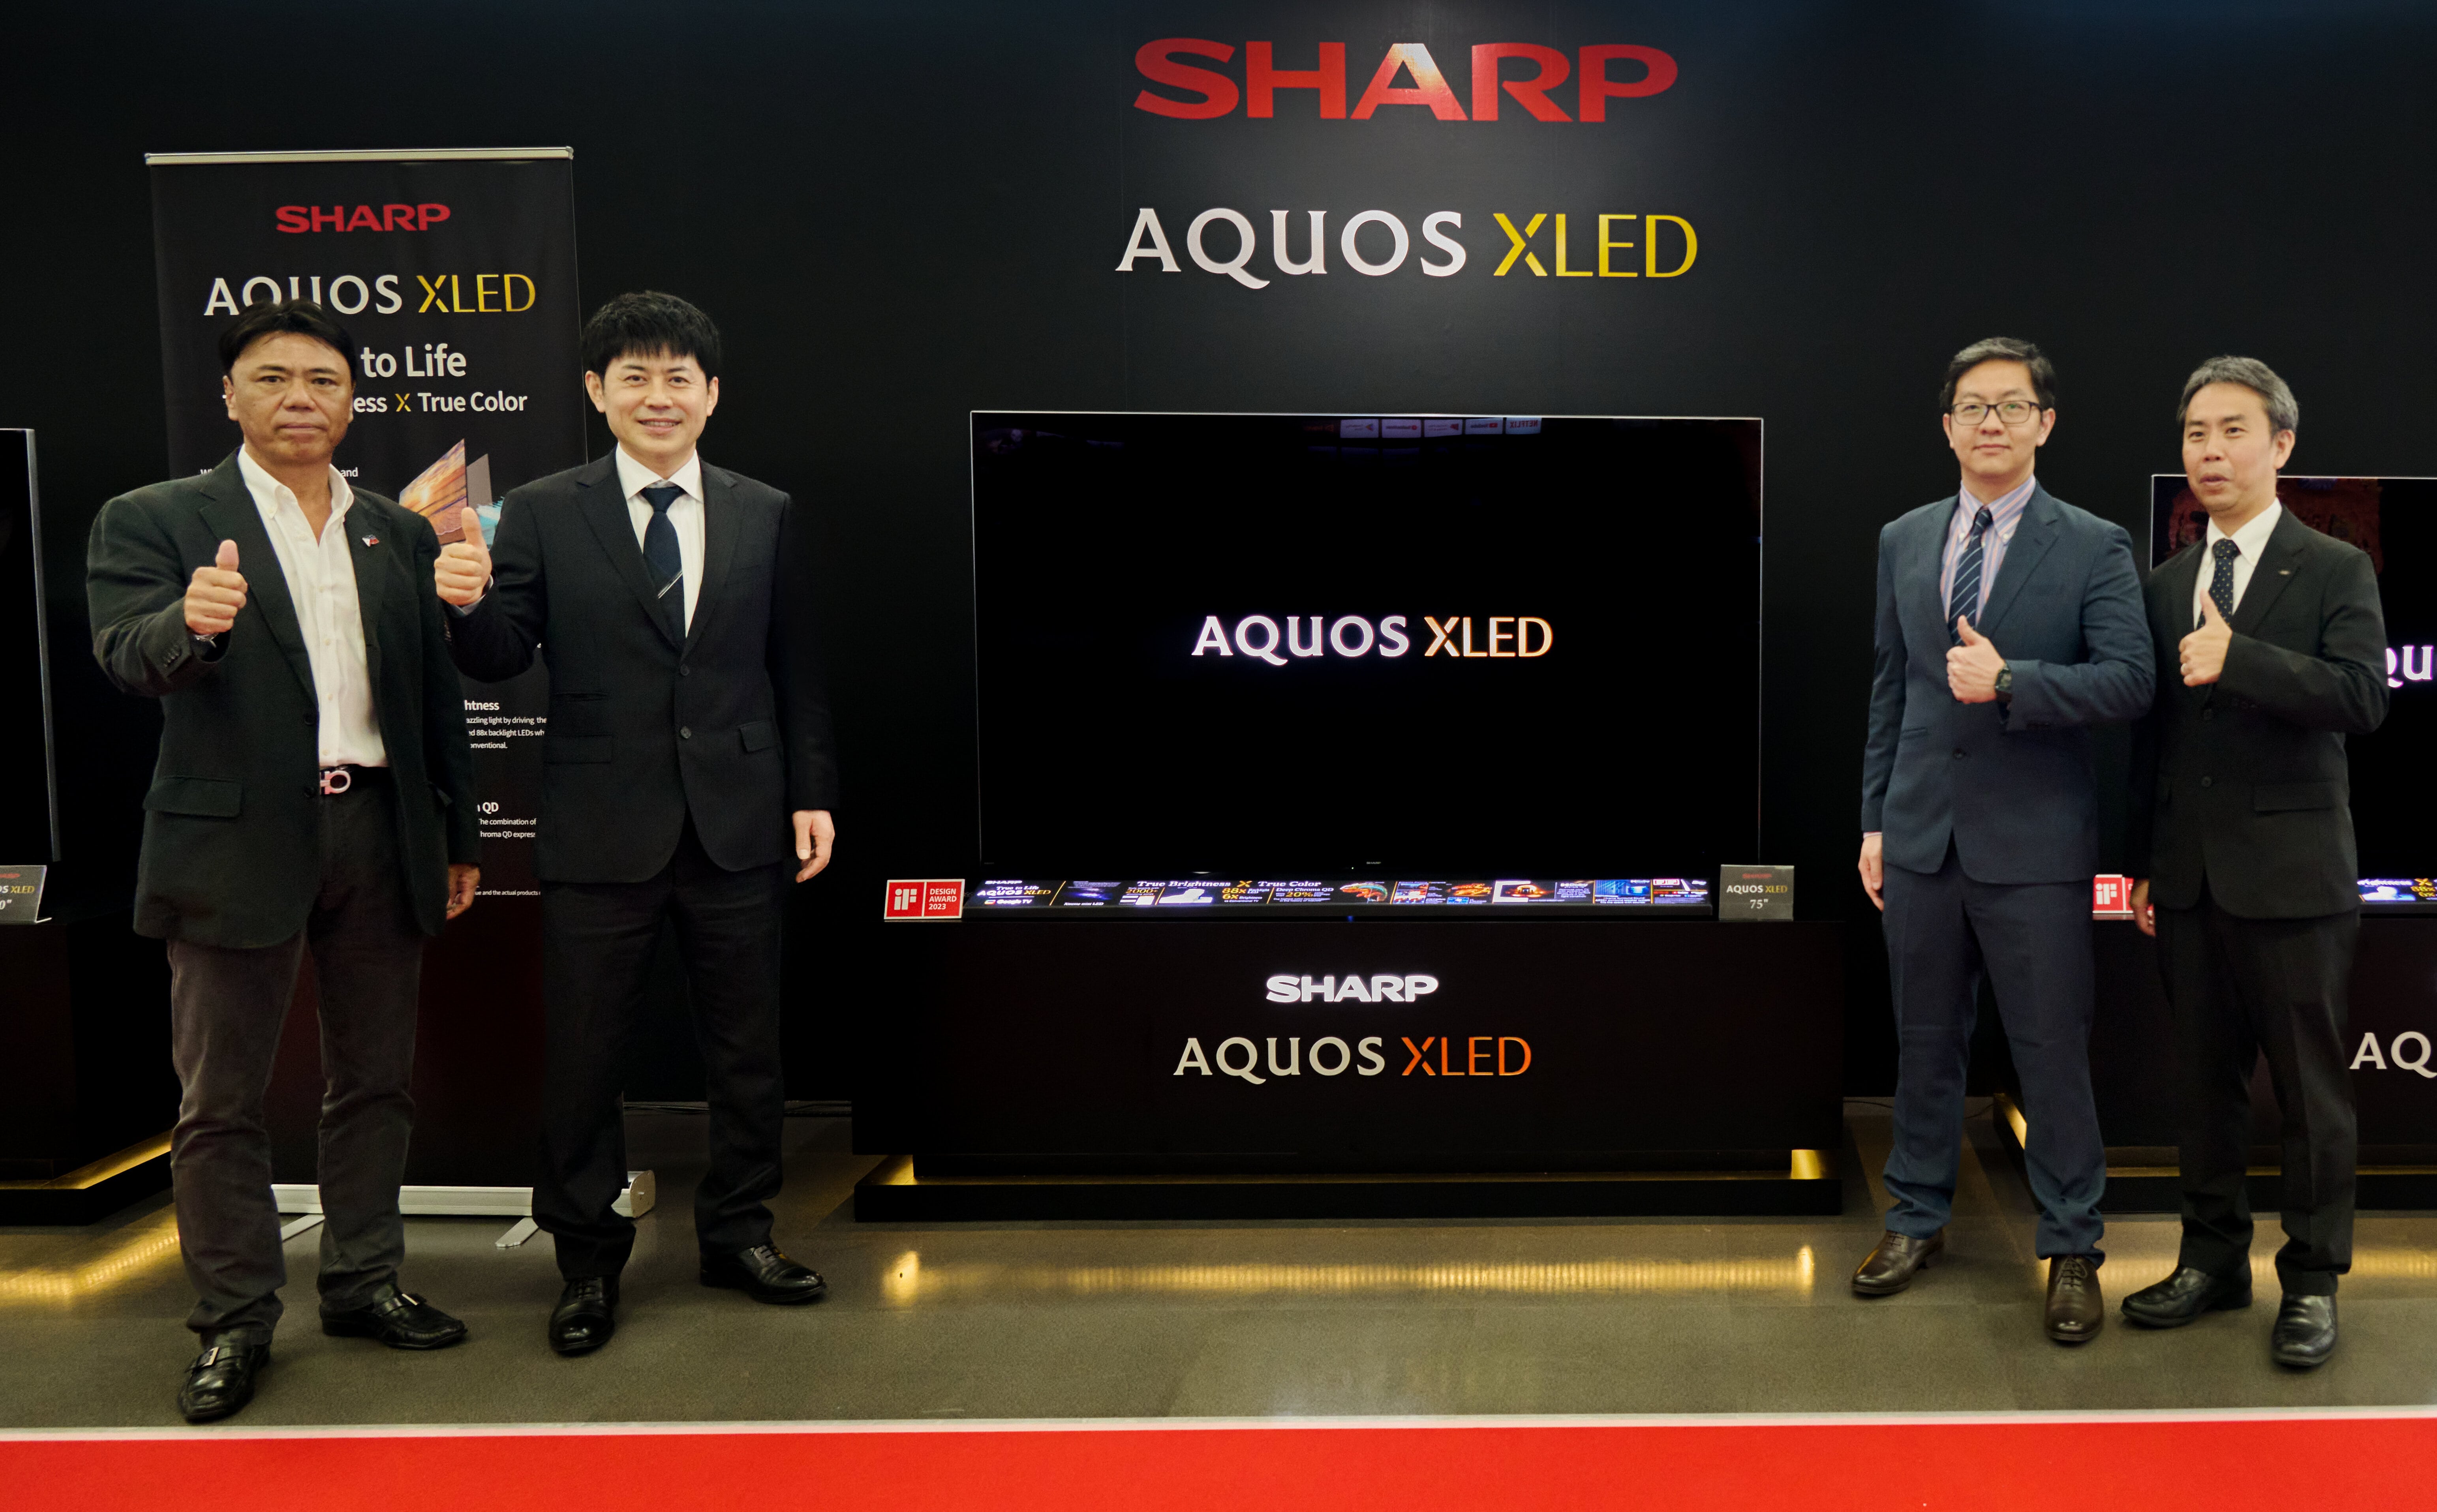 Sharp AQUOS XLED 4K TV Launches in Asia, Middle East and Africa